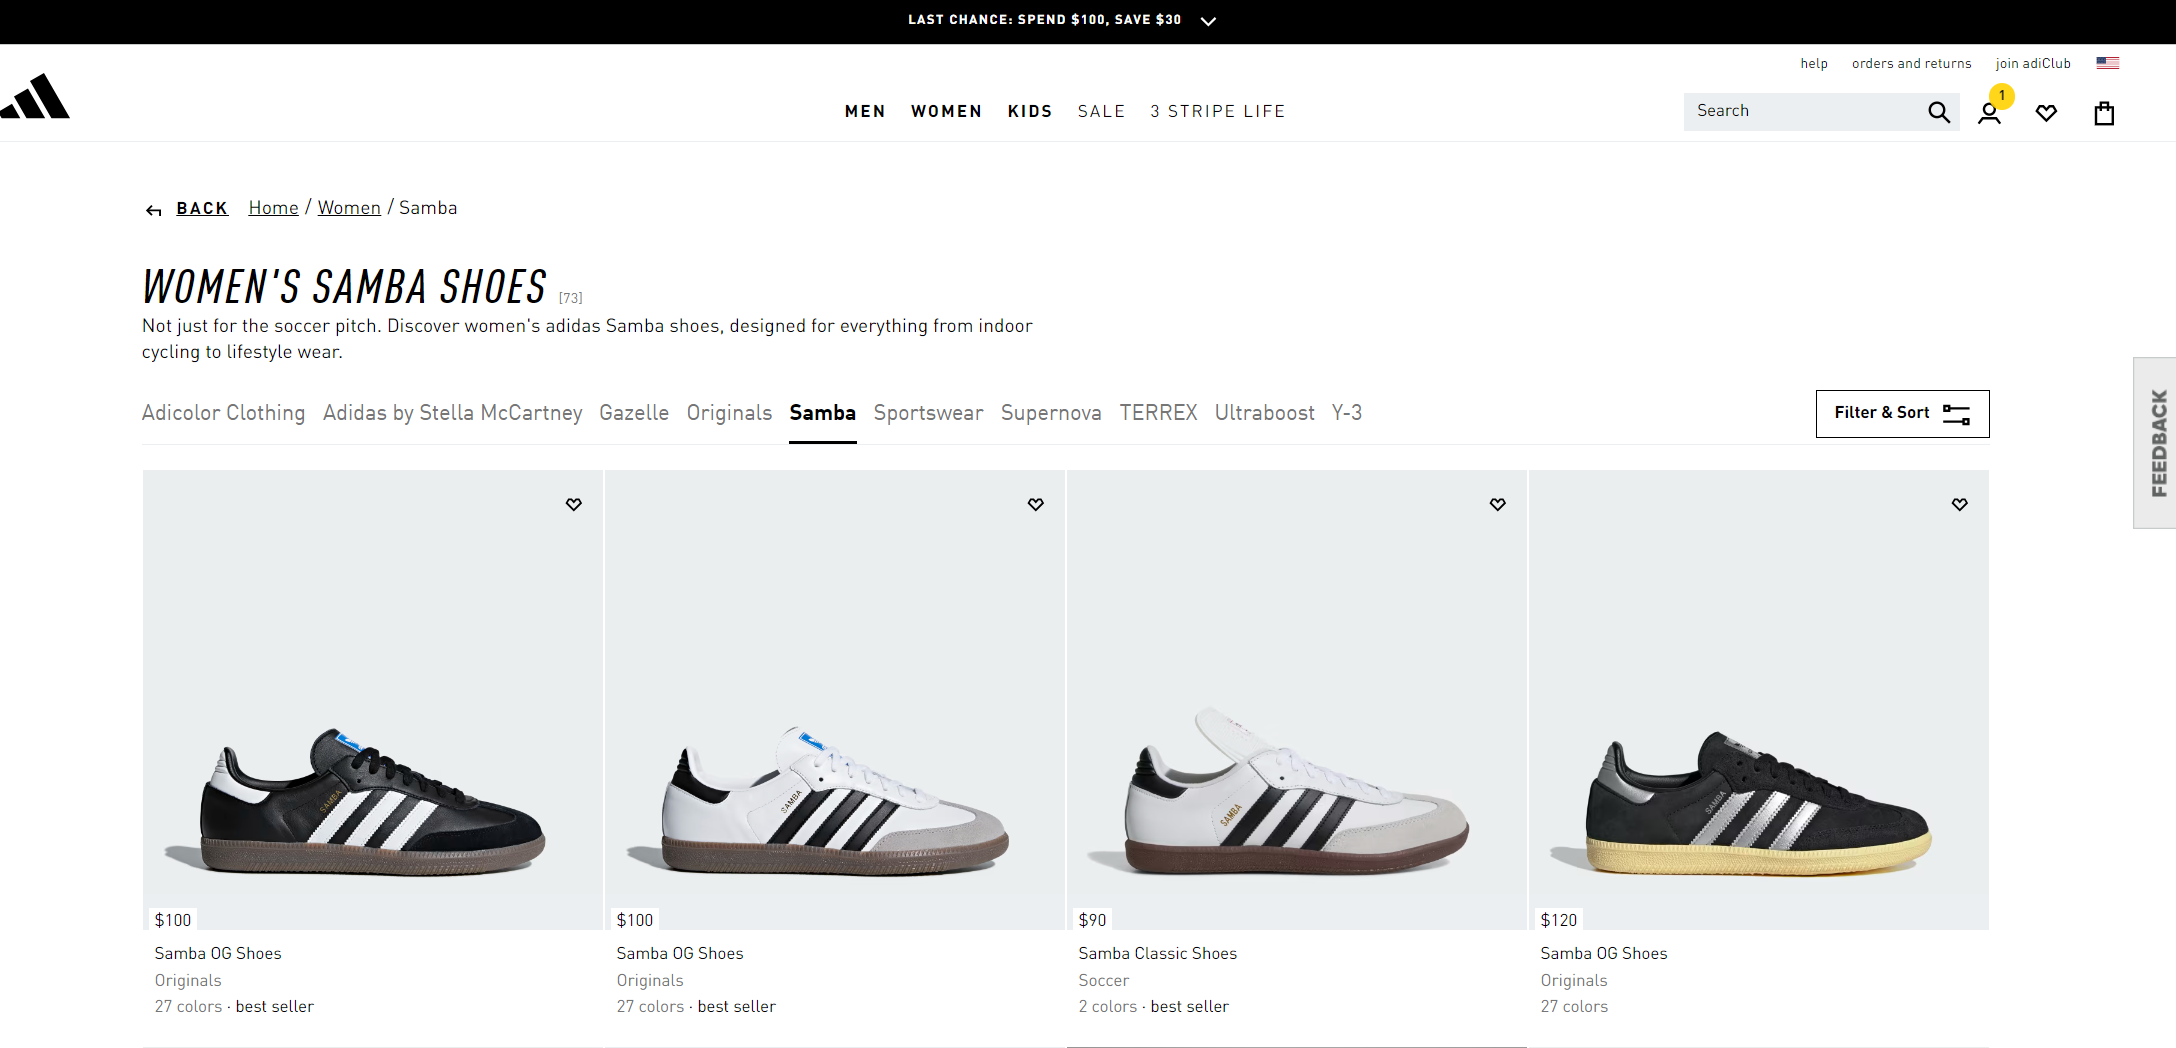  Addidas's management of its category and sub-category pages is a great example.